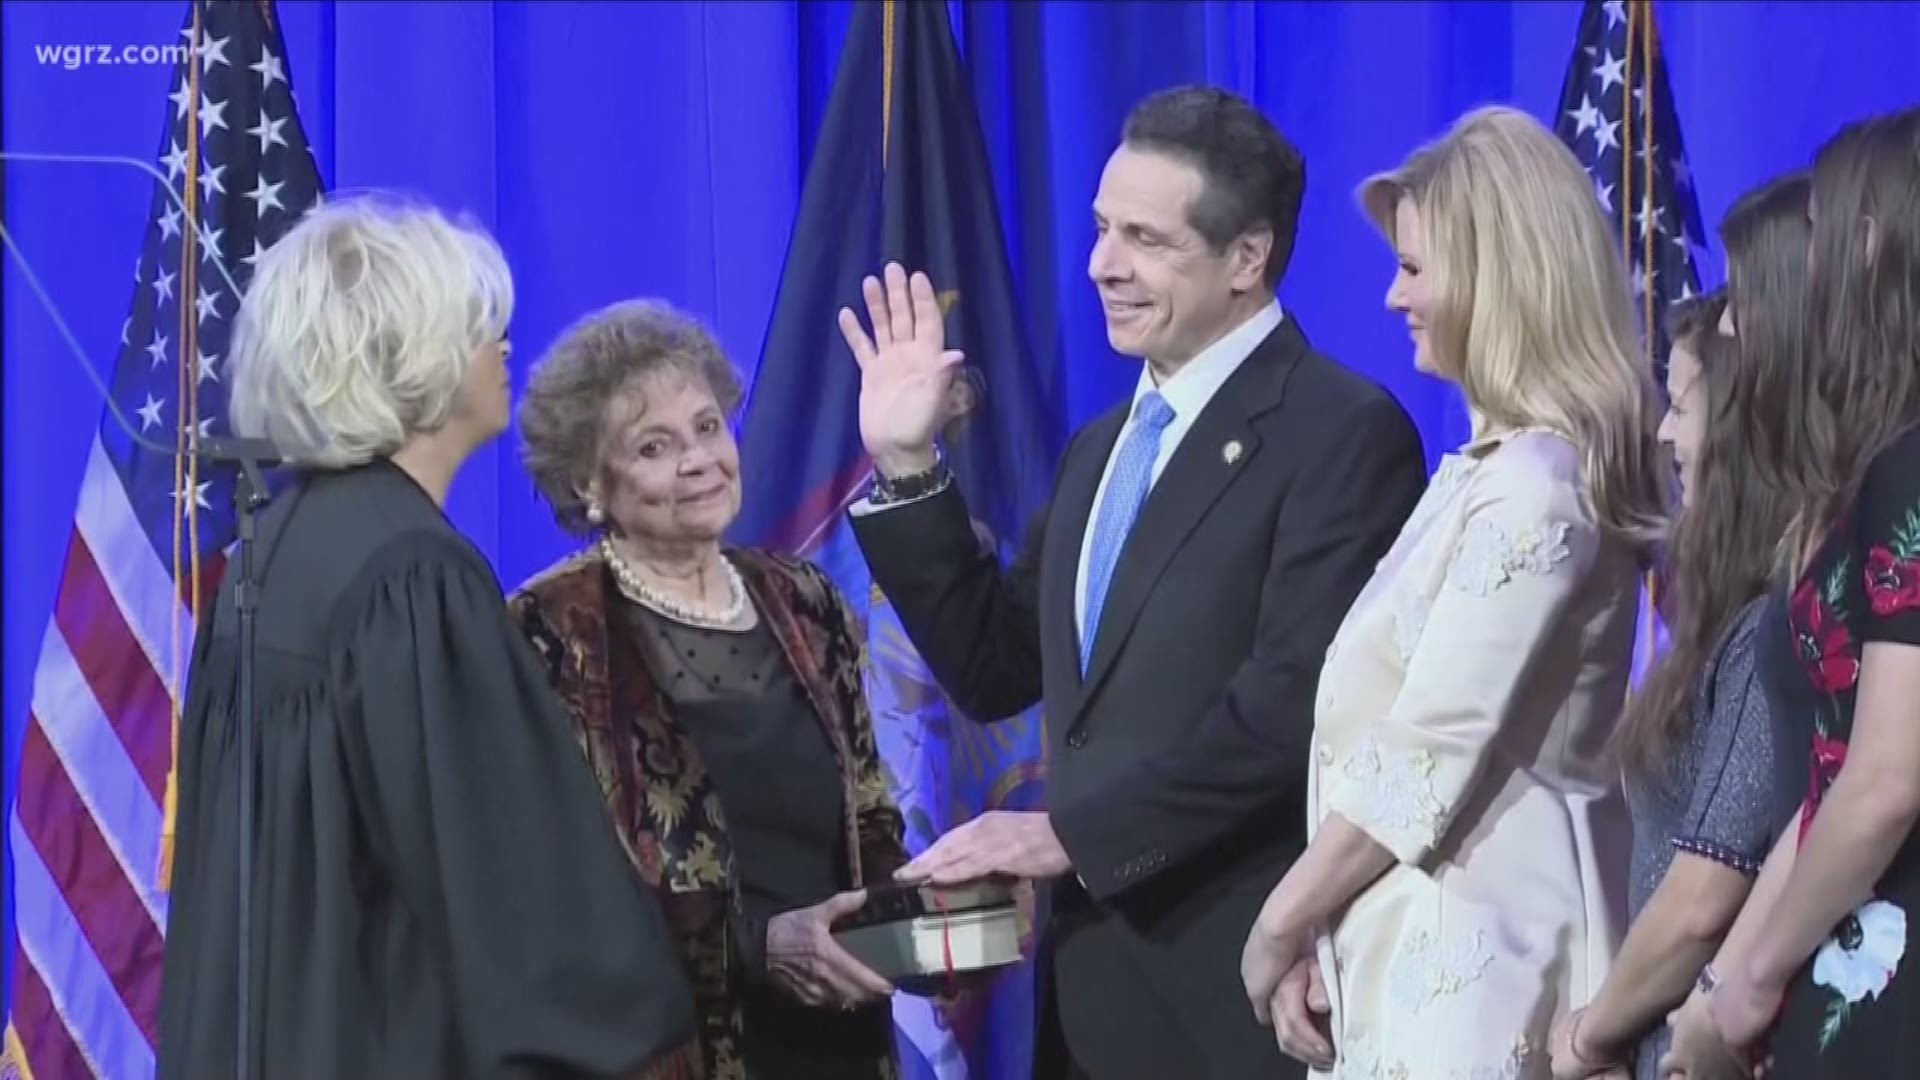 Governor Andrew Cuomo was officially sworn in for his third term as governor of New York state.
Cuomo beat Republican Marc Molinaro back in November and marked his third inauguration at an event on Ellis Island, in New York Bay.